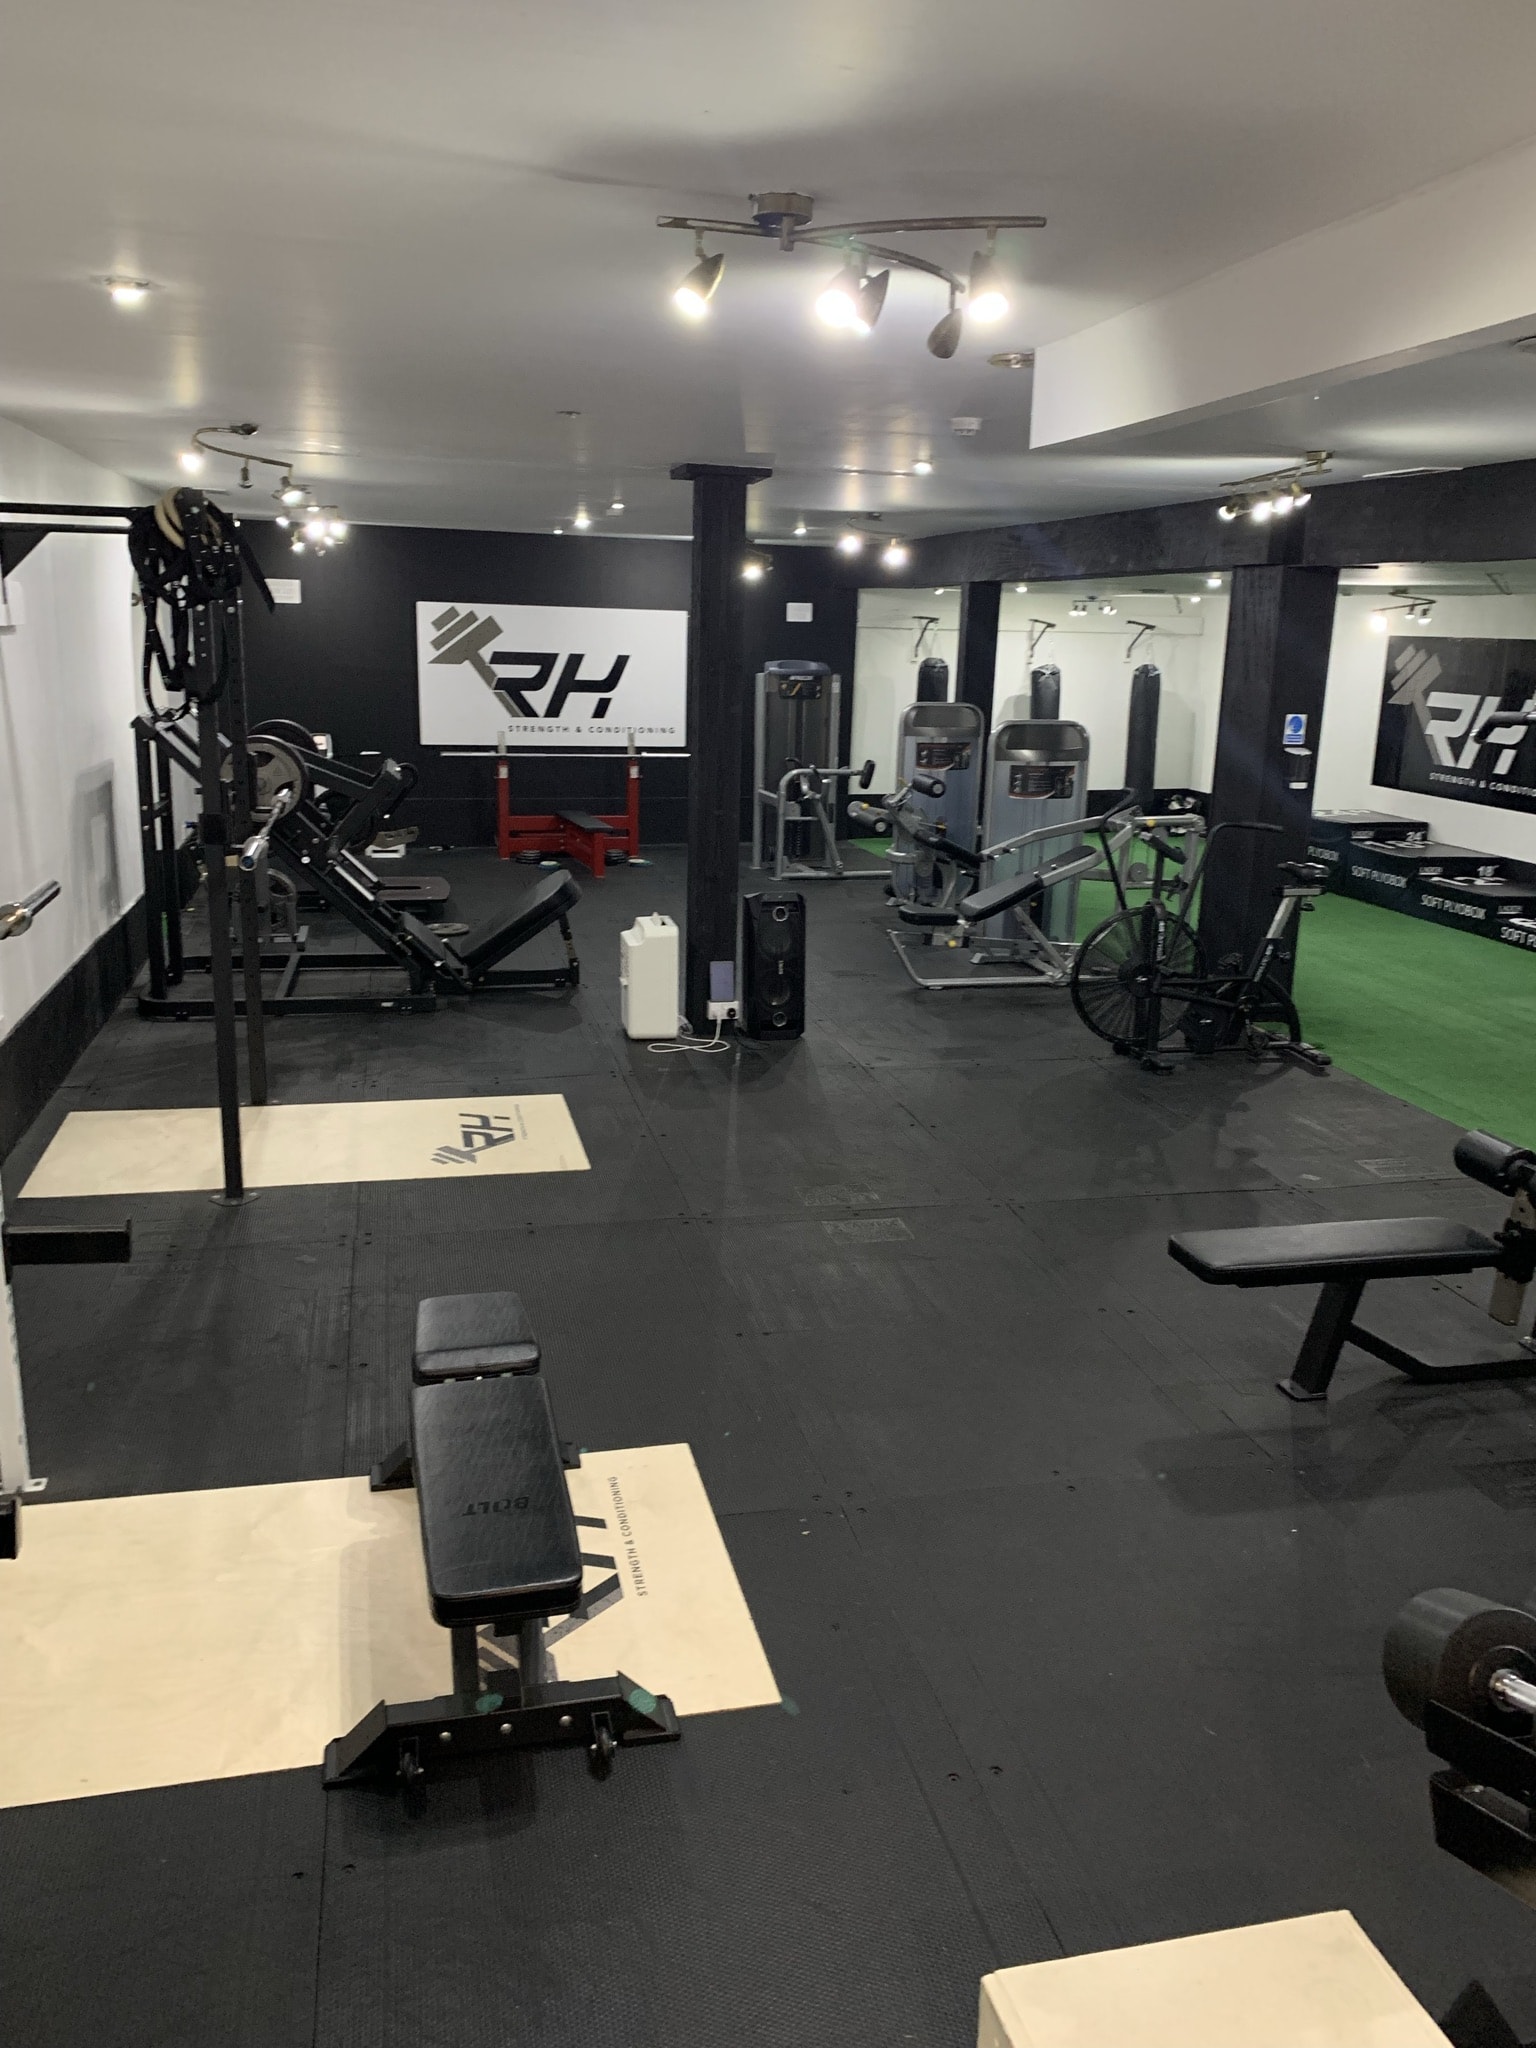 Rh strength & Conditioning - Co. Limerick, IE, strength and conditioning
